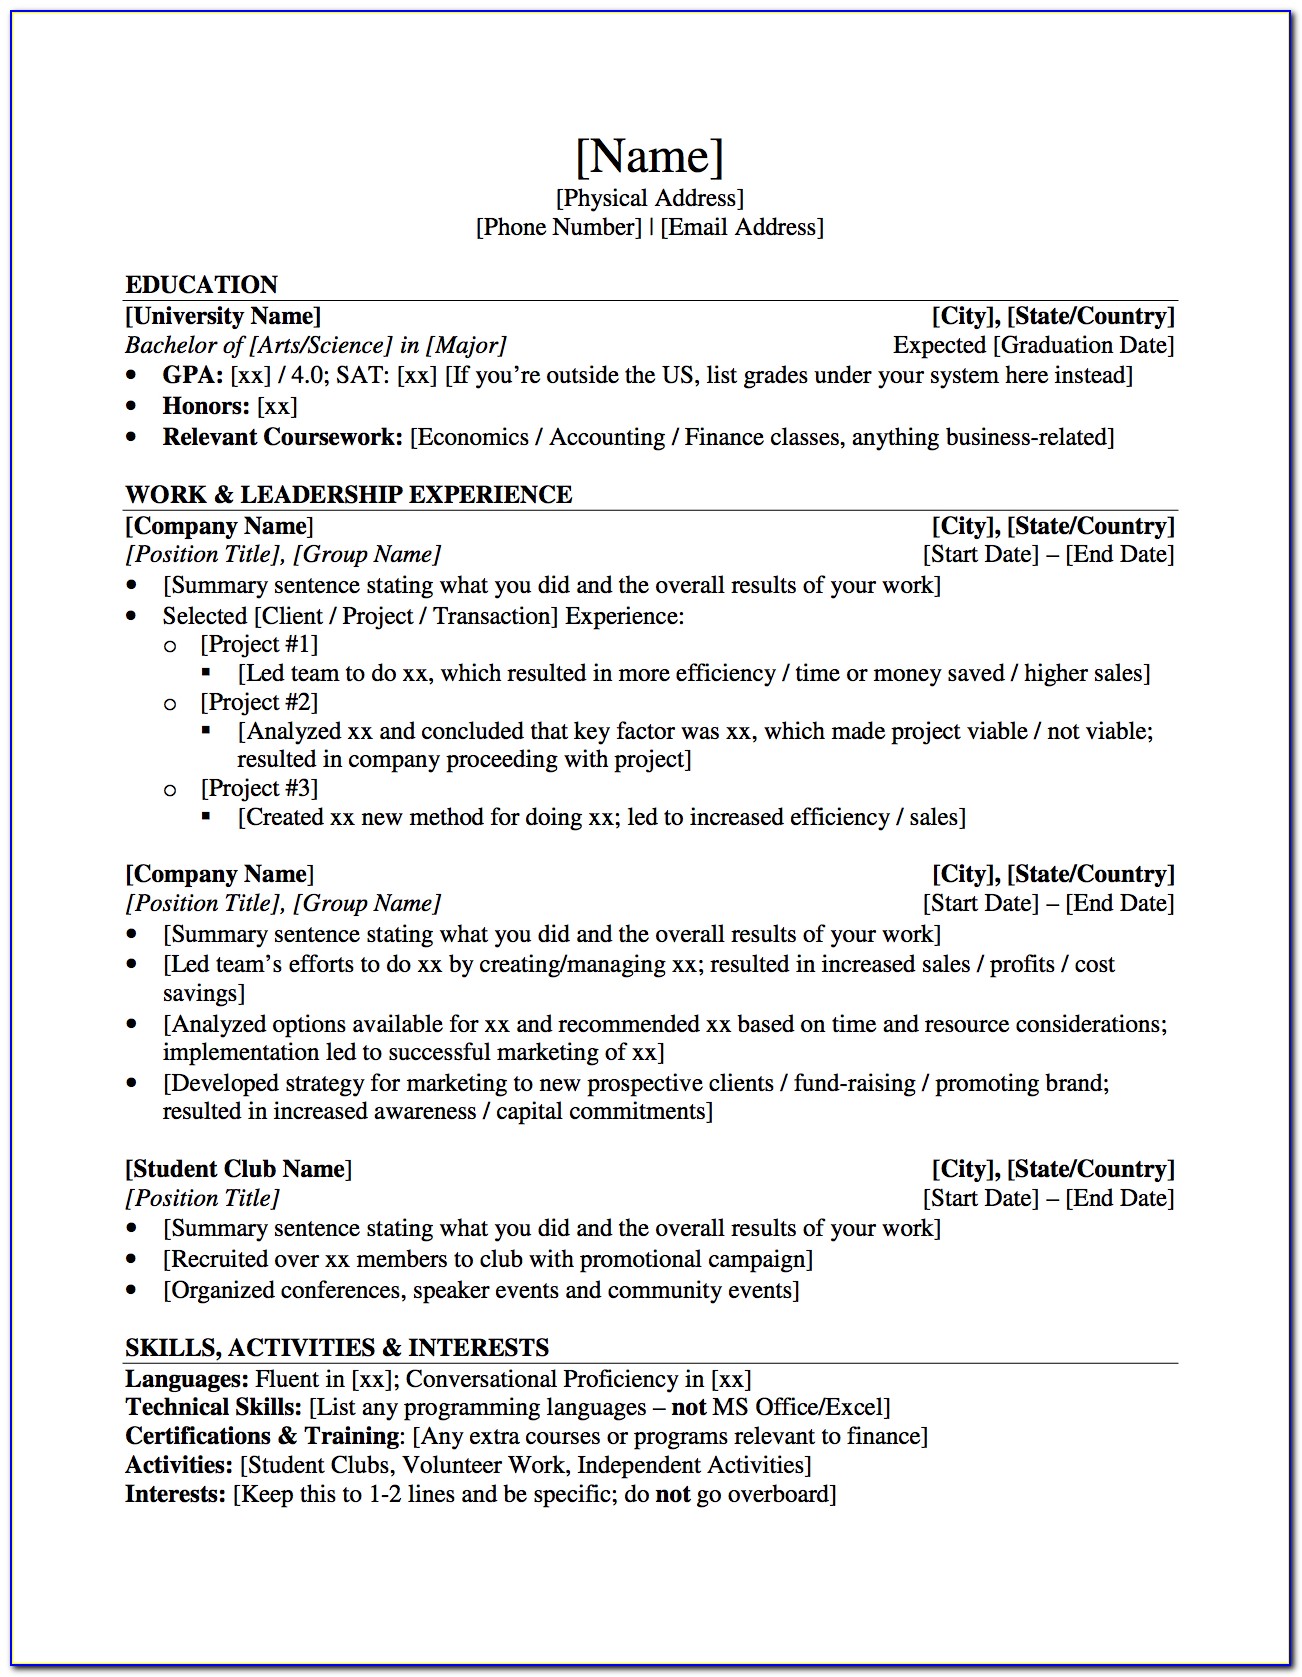 Curriculum Vitae Examples For Students Pdf